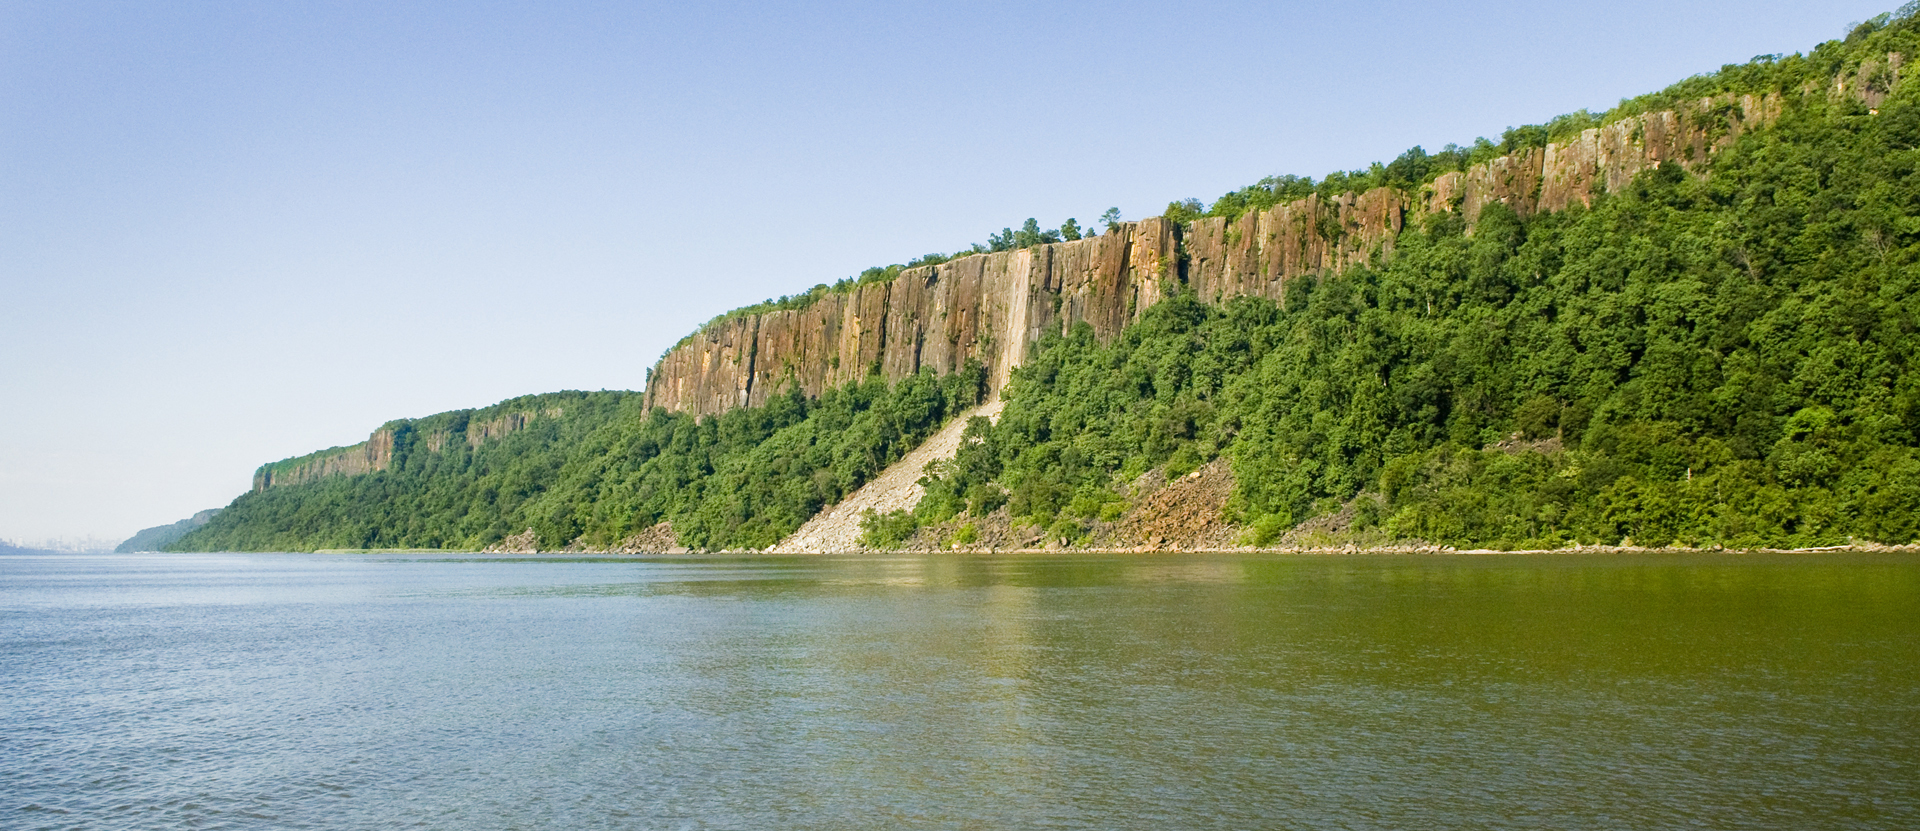 The Palisades of the Hudson